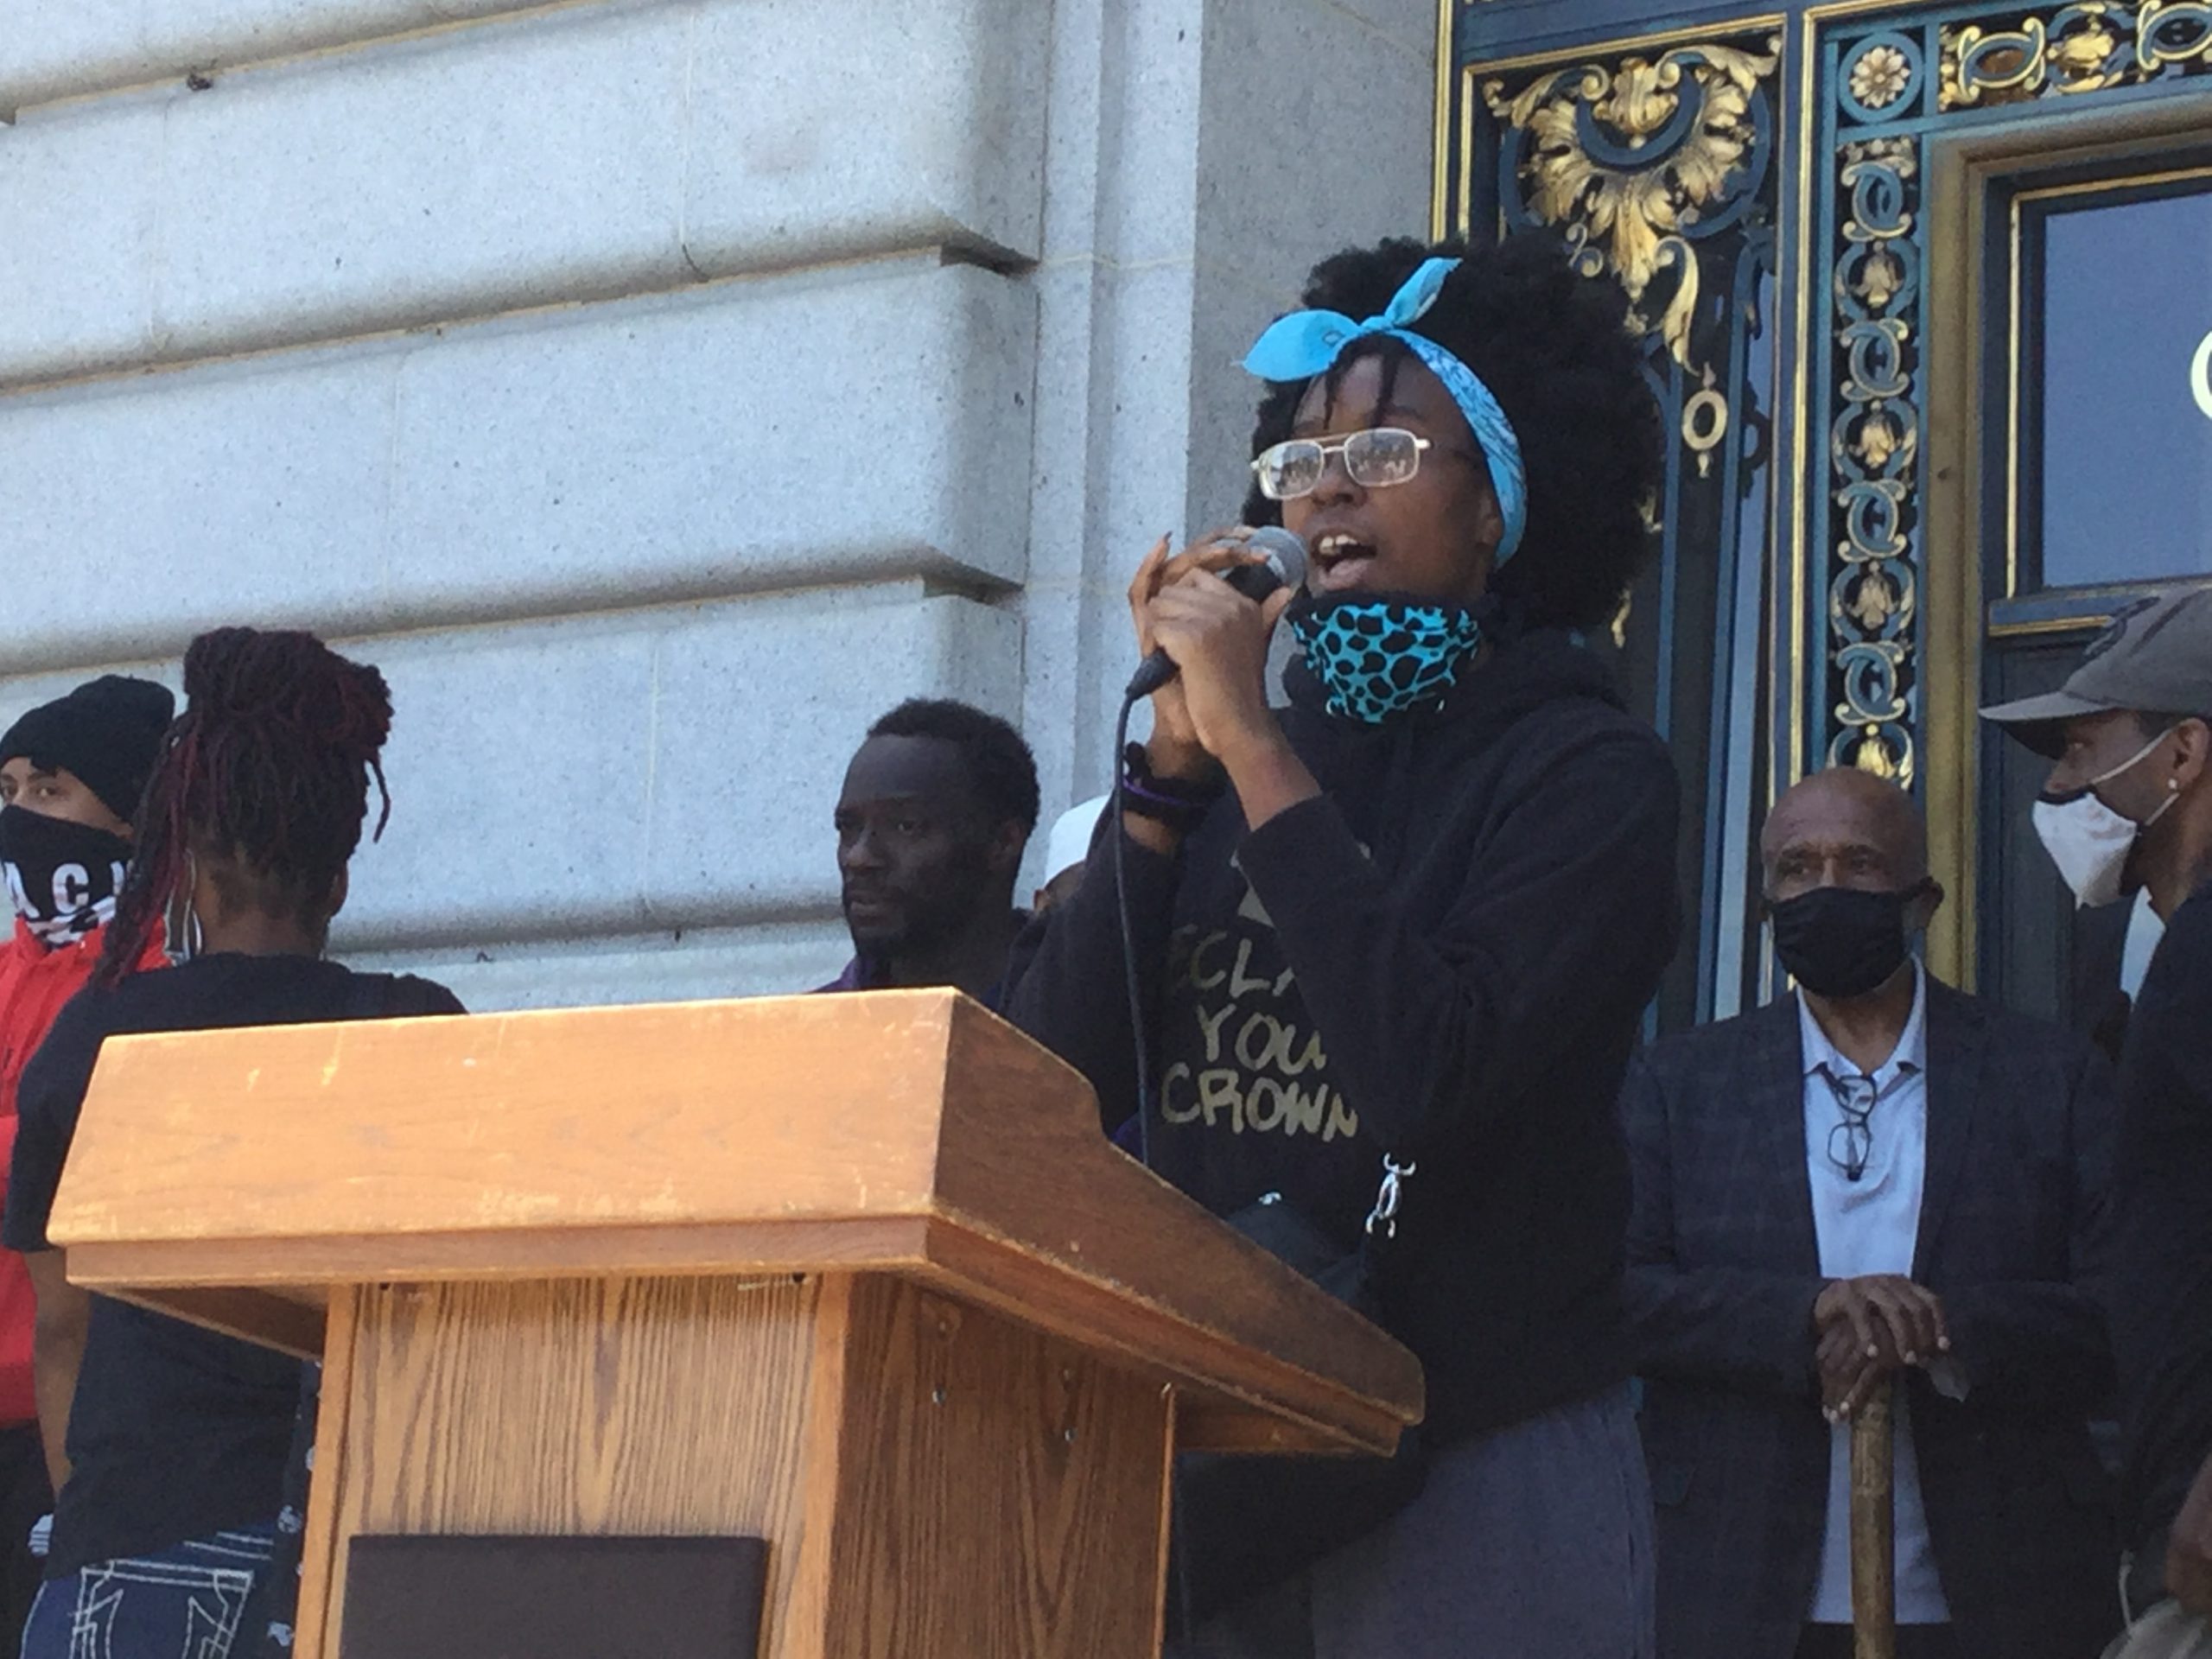 An African American teen girl, Alysia Reaves, speaks into a microphone behind a podium in front of SF City Hall.